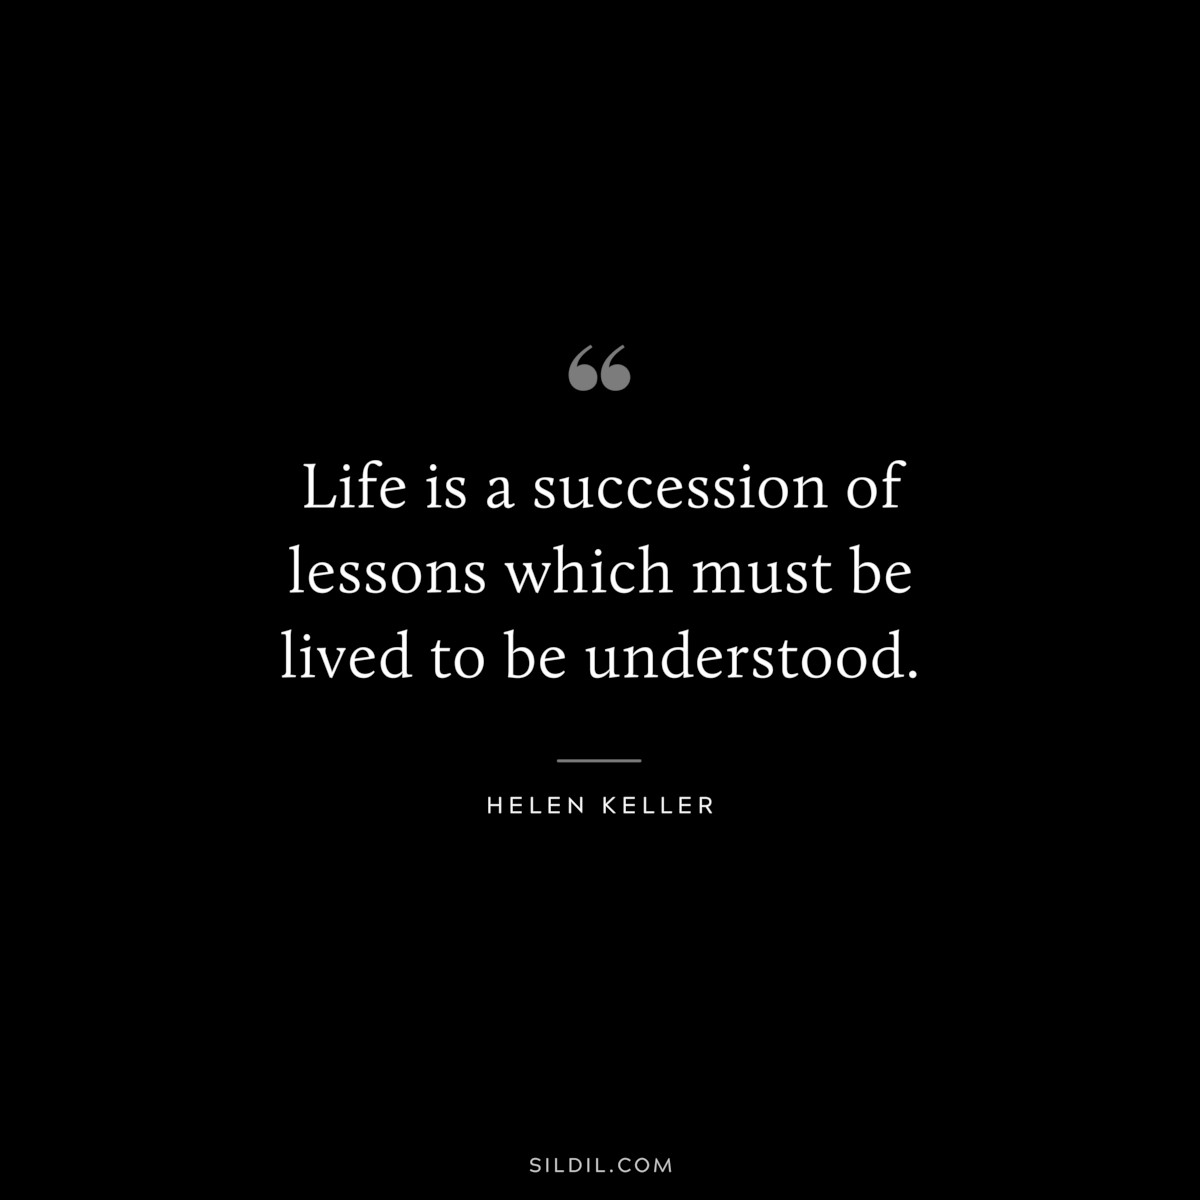 Life is a succession of lessons which must be lived to be understood. ― Helen Keller